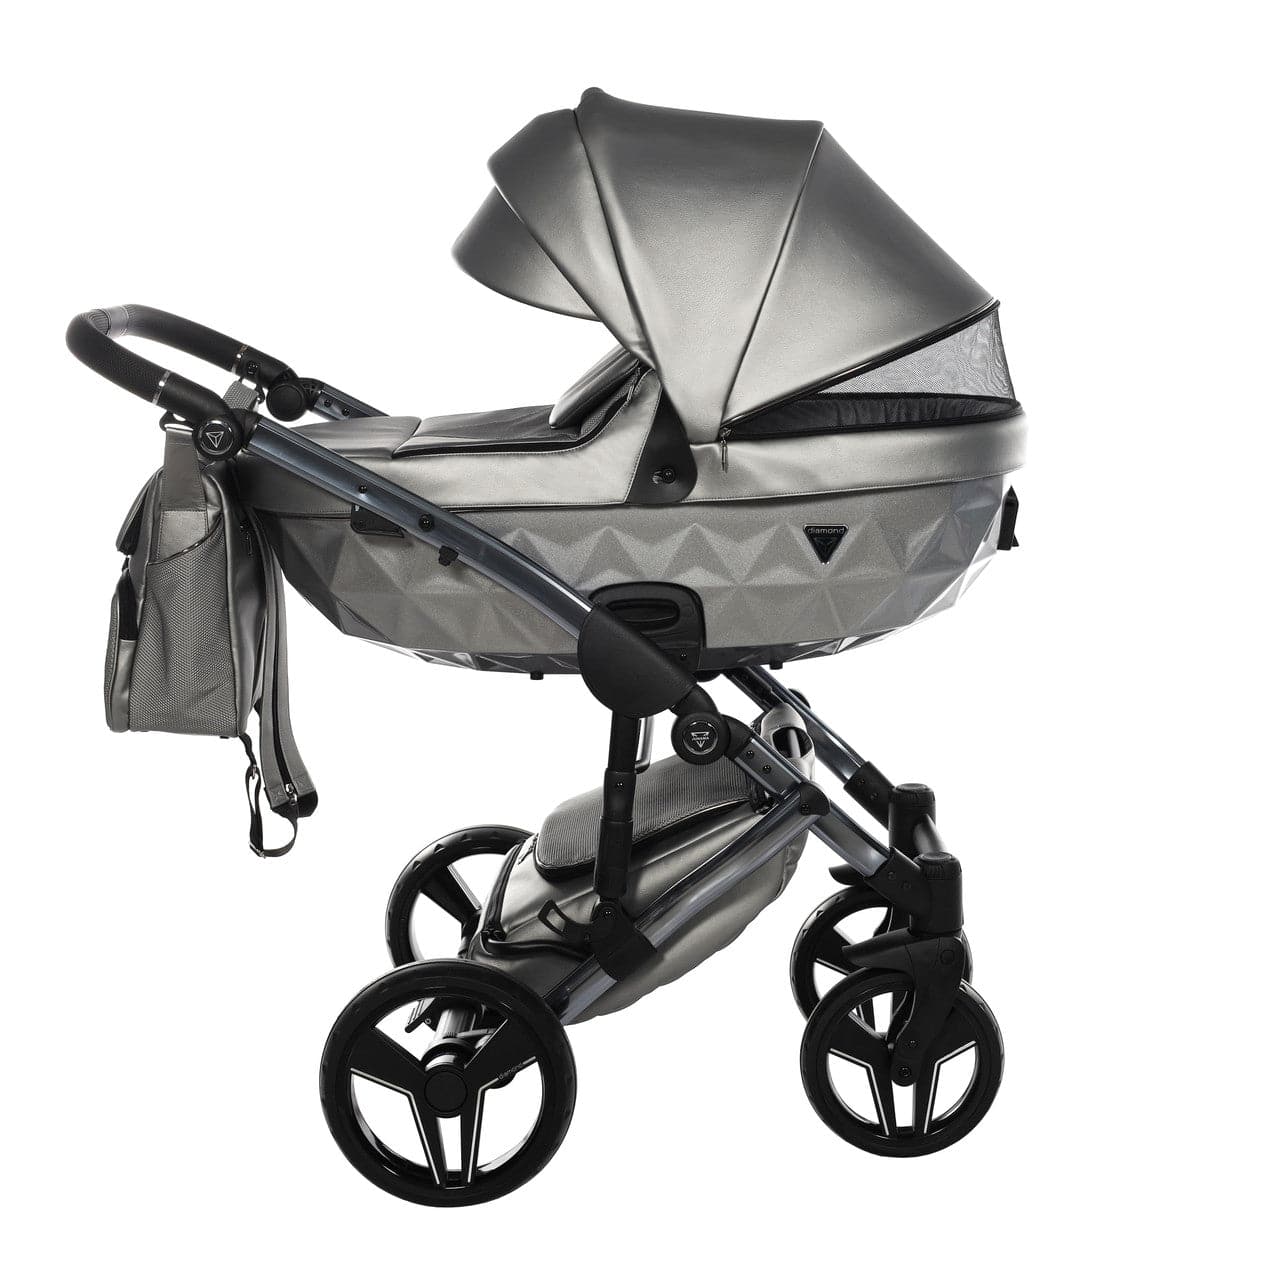 Junama S-Class 2 In 1 Pram - Silver - For Your Little One